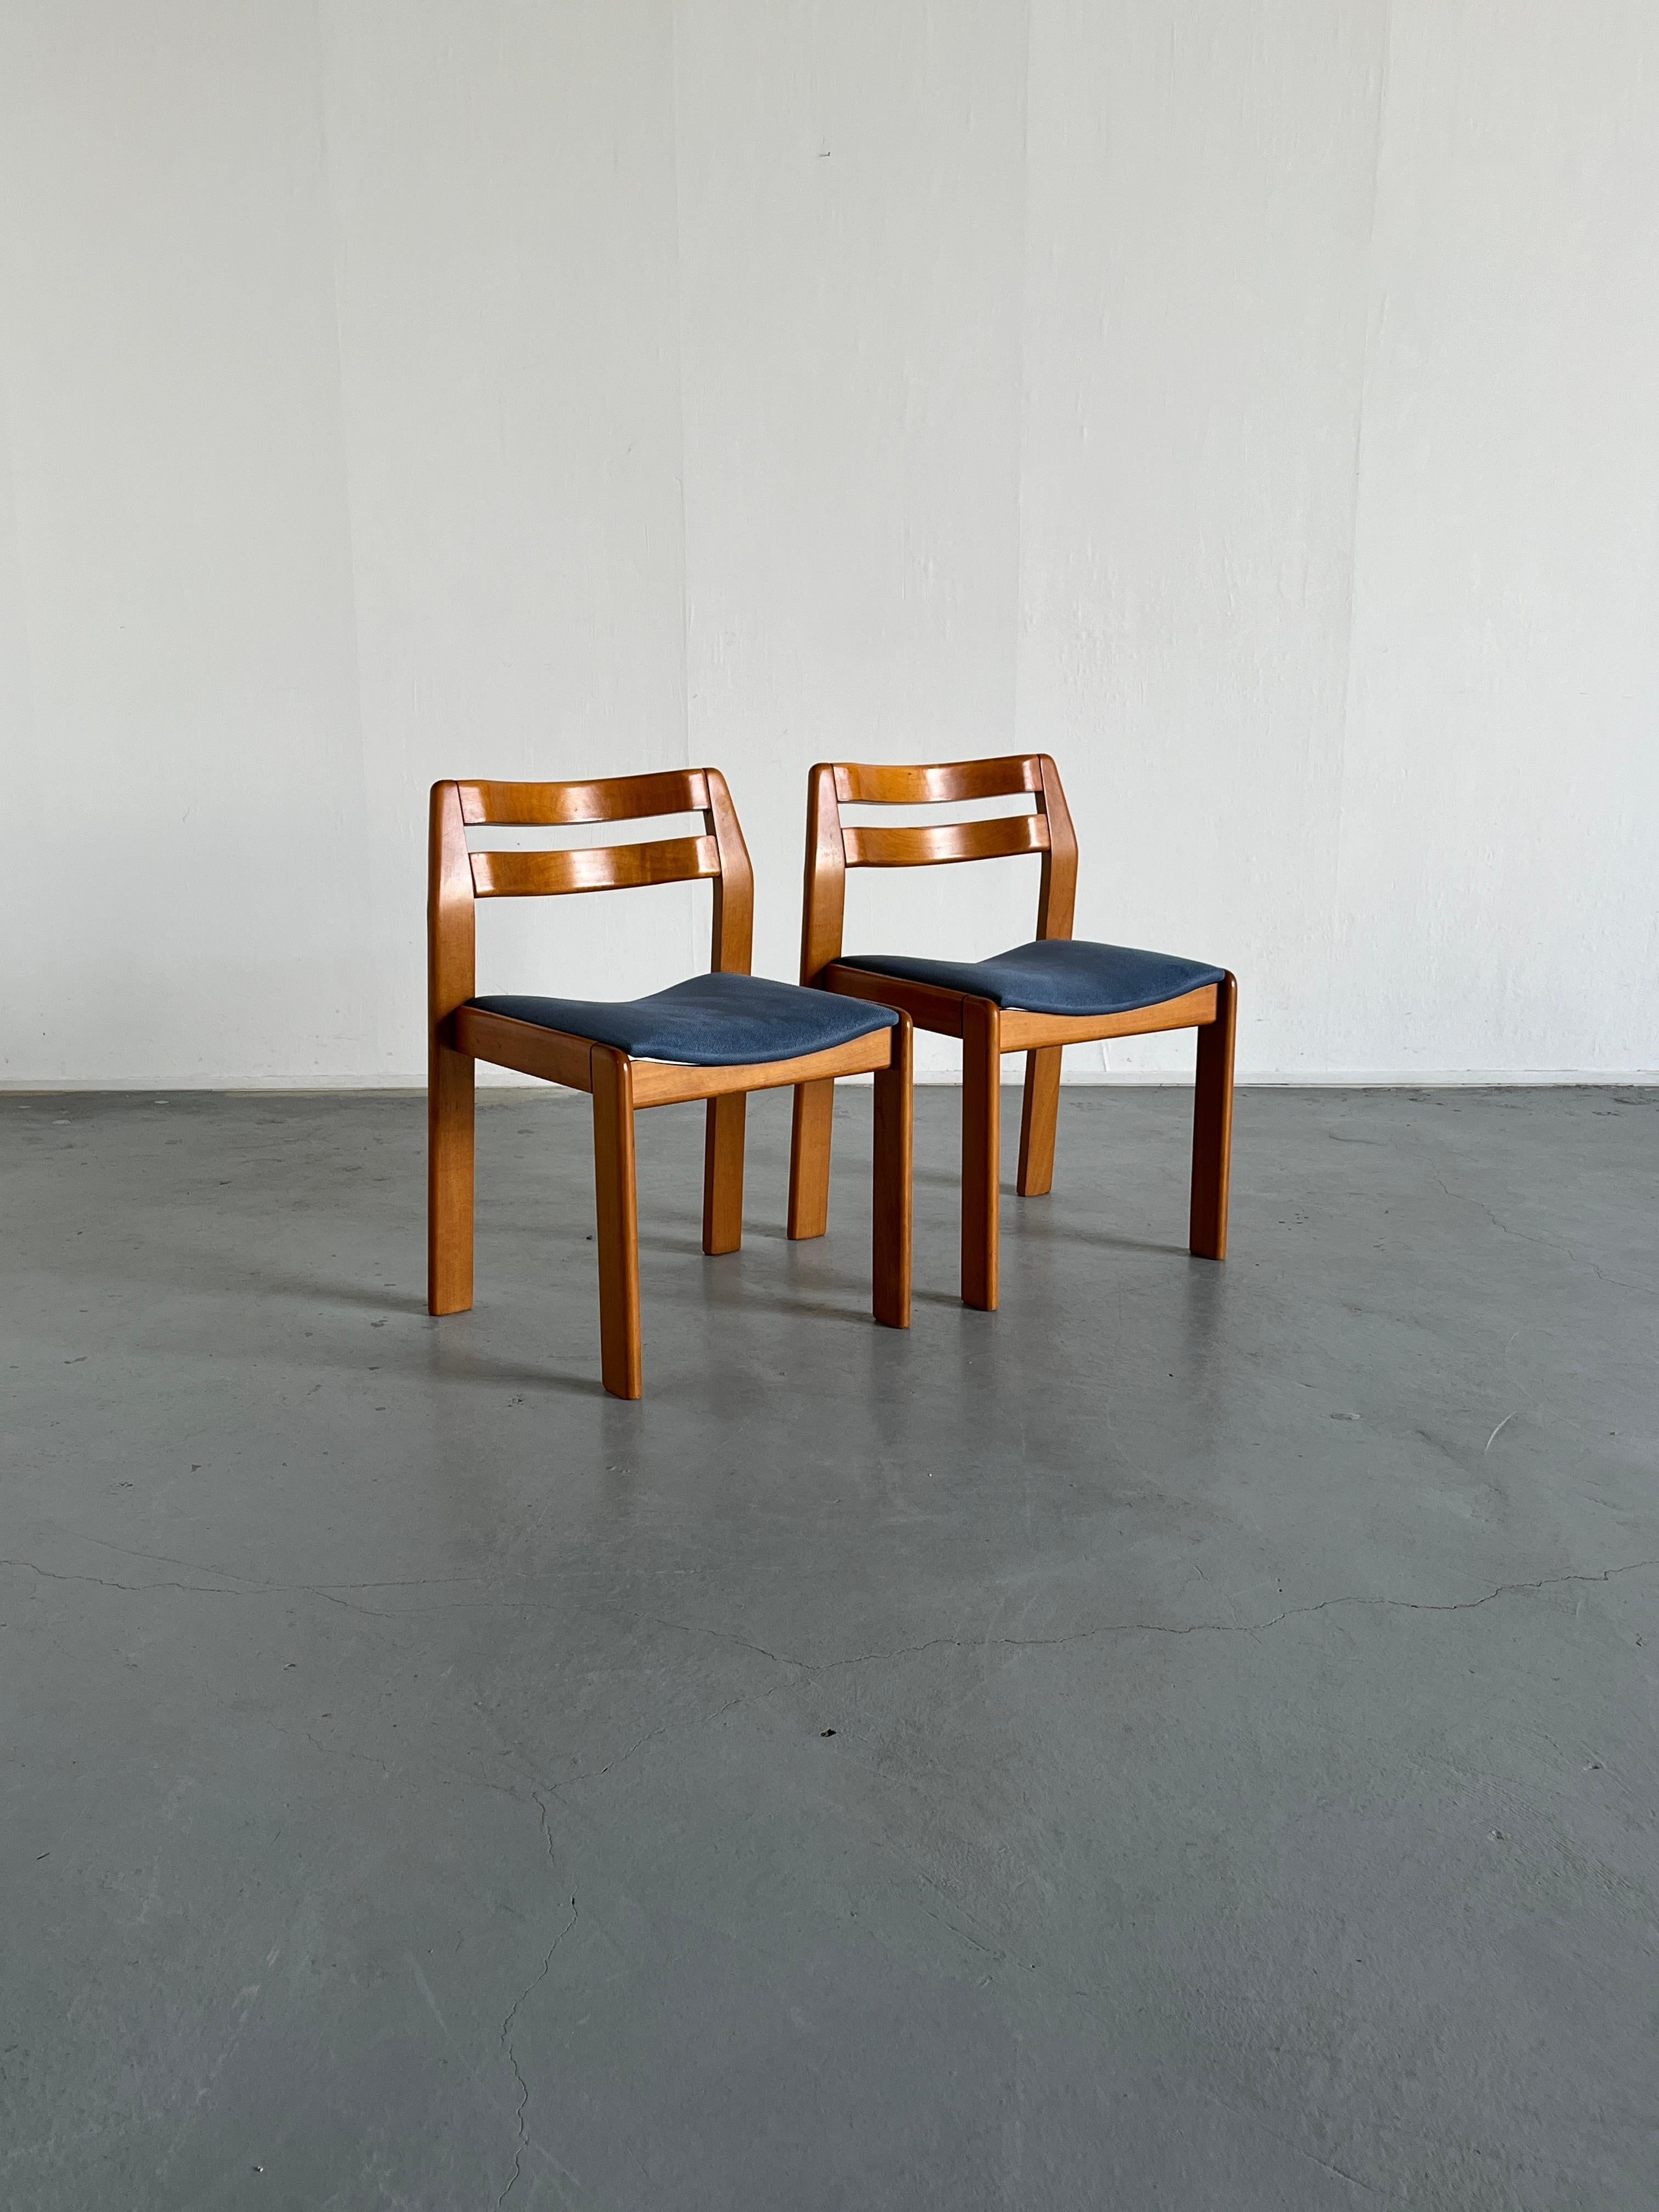 European Pair of Elegant Italian Mid-Century Modern Lacquered Wood Dining Chairs, 1960s For Sale